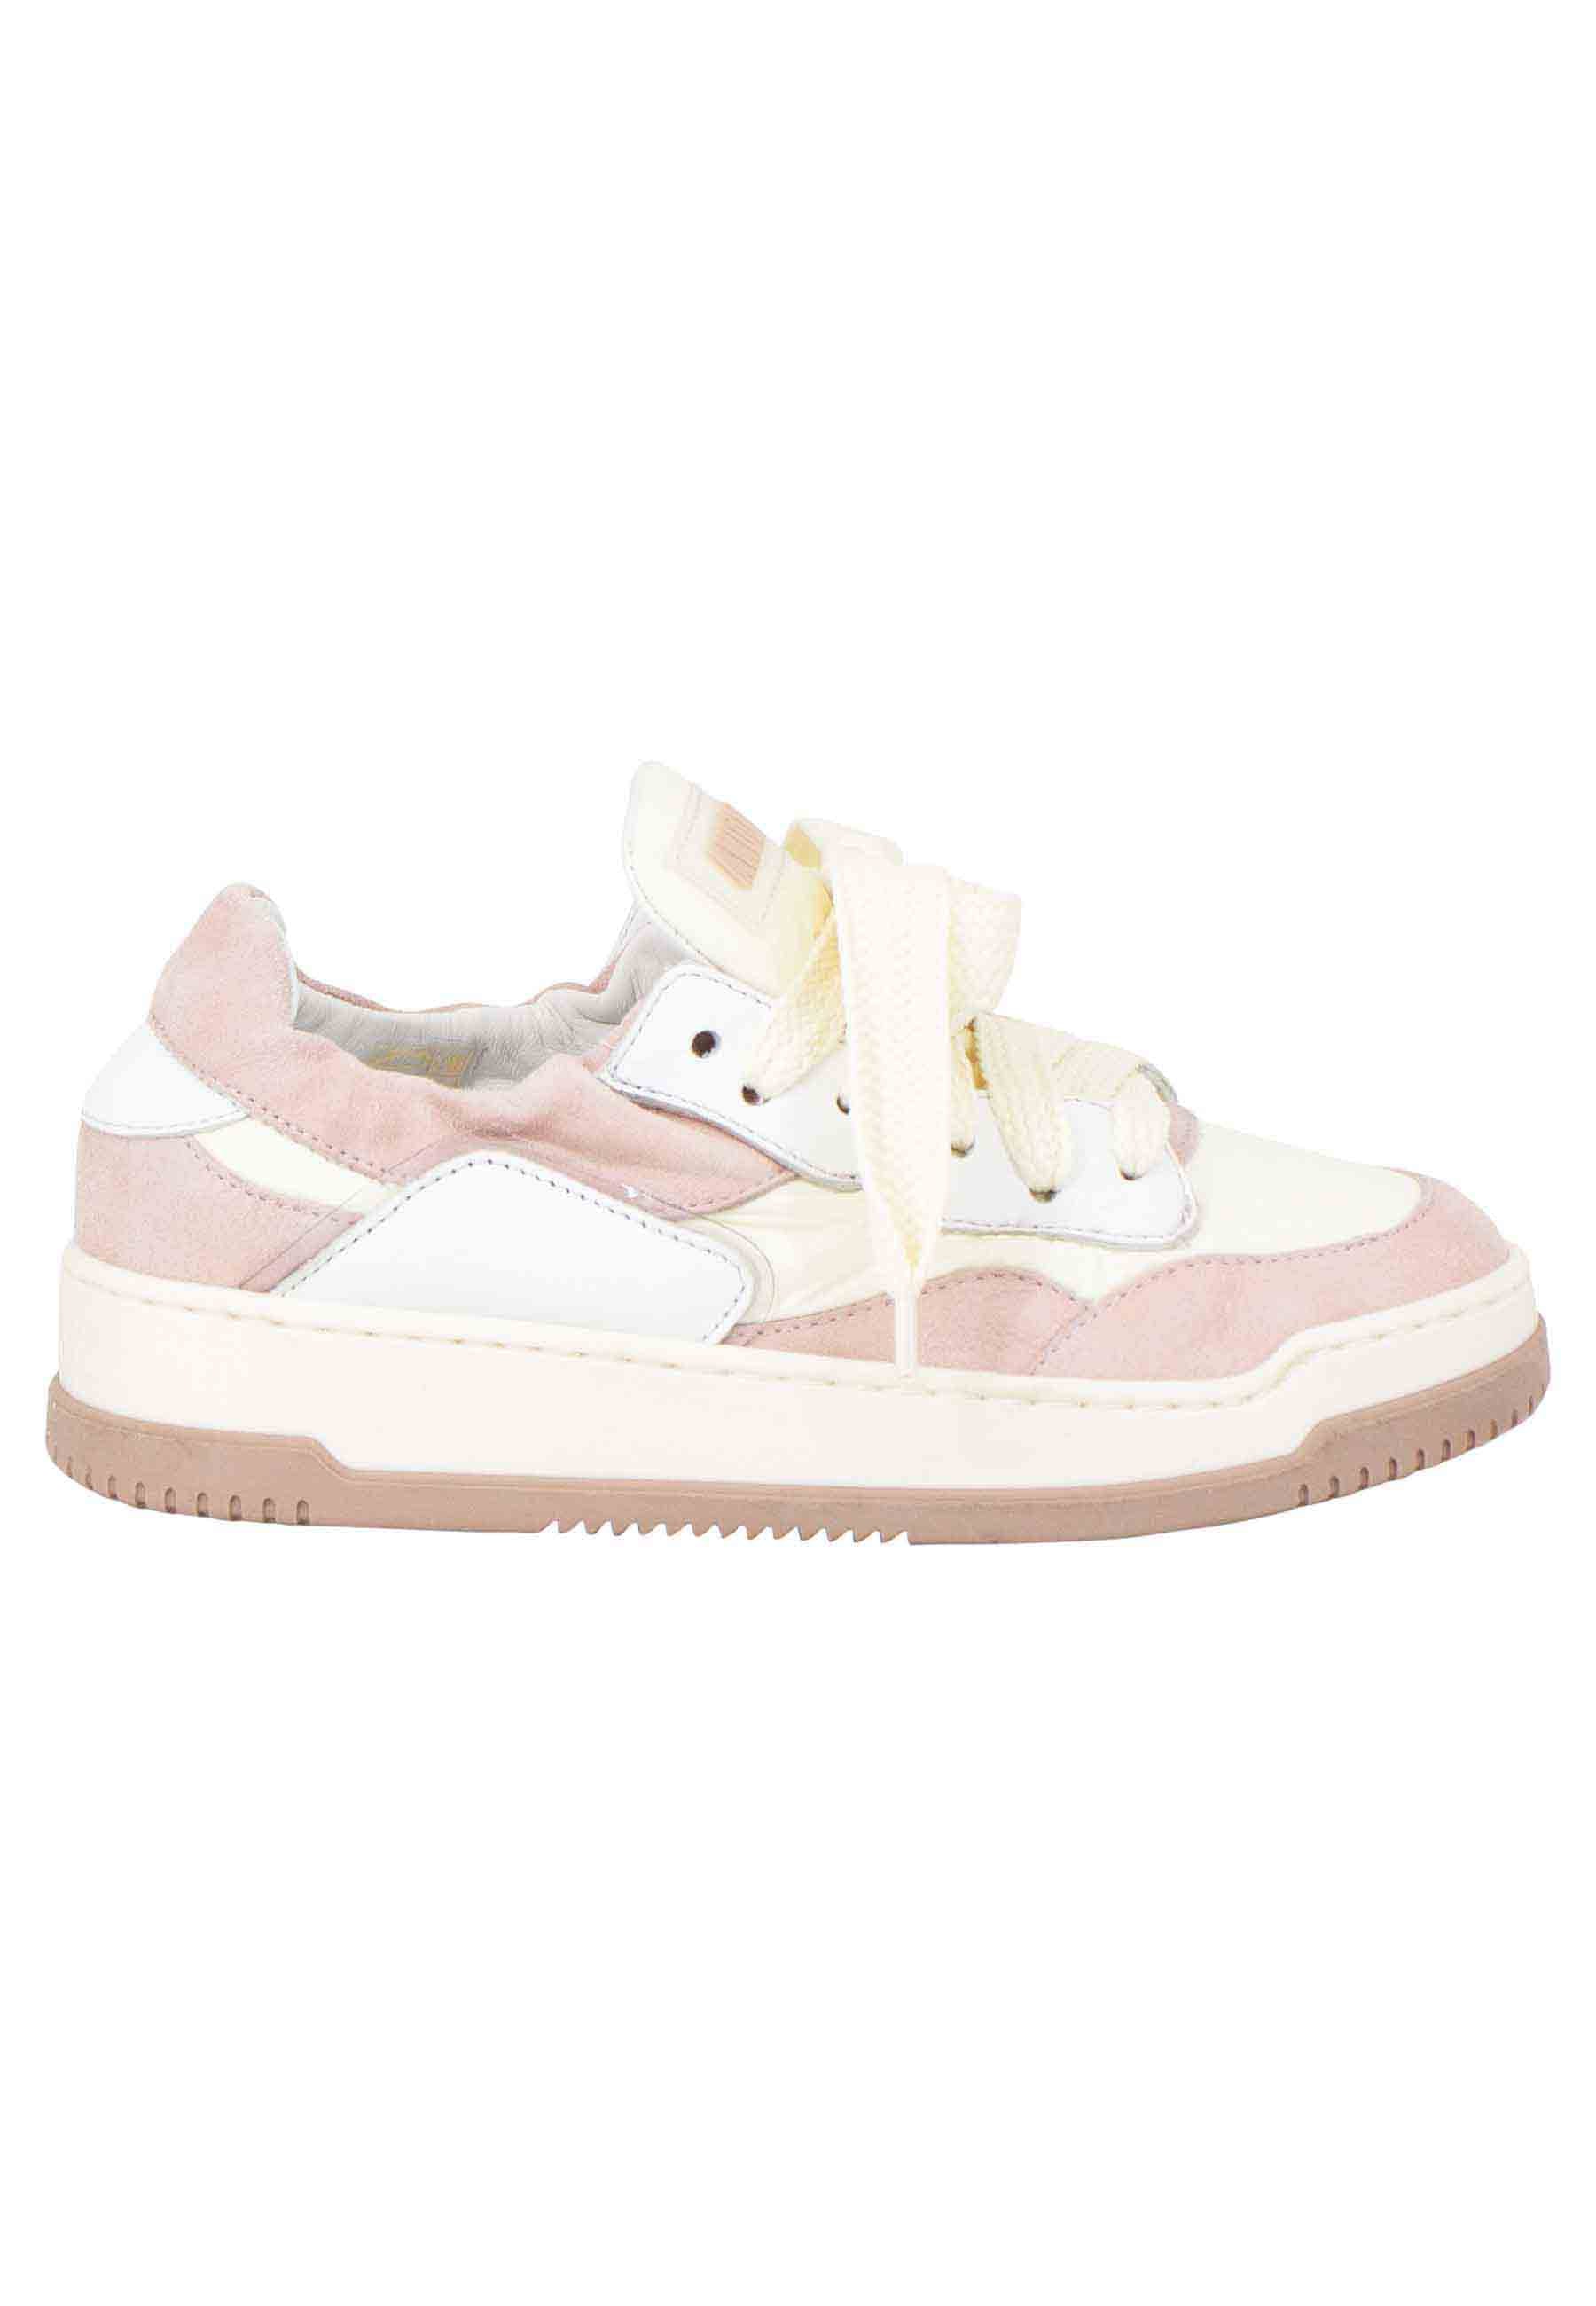 Women's sneakers in beige and pink leather with rubber sole